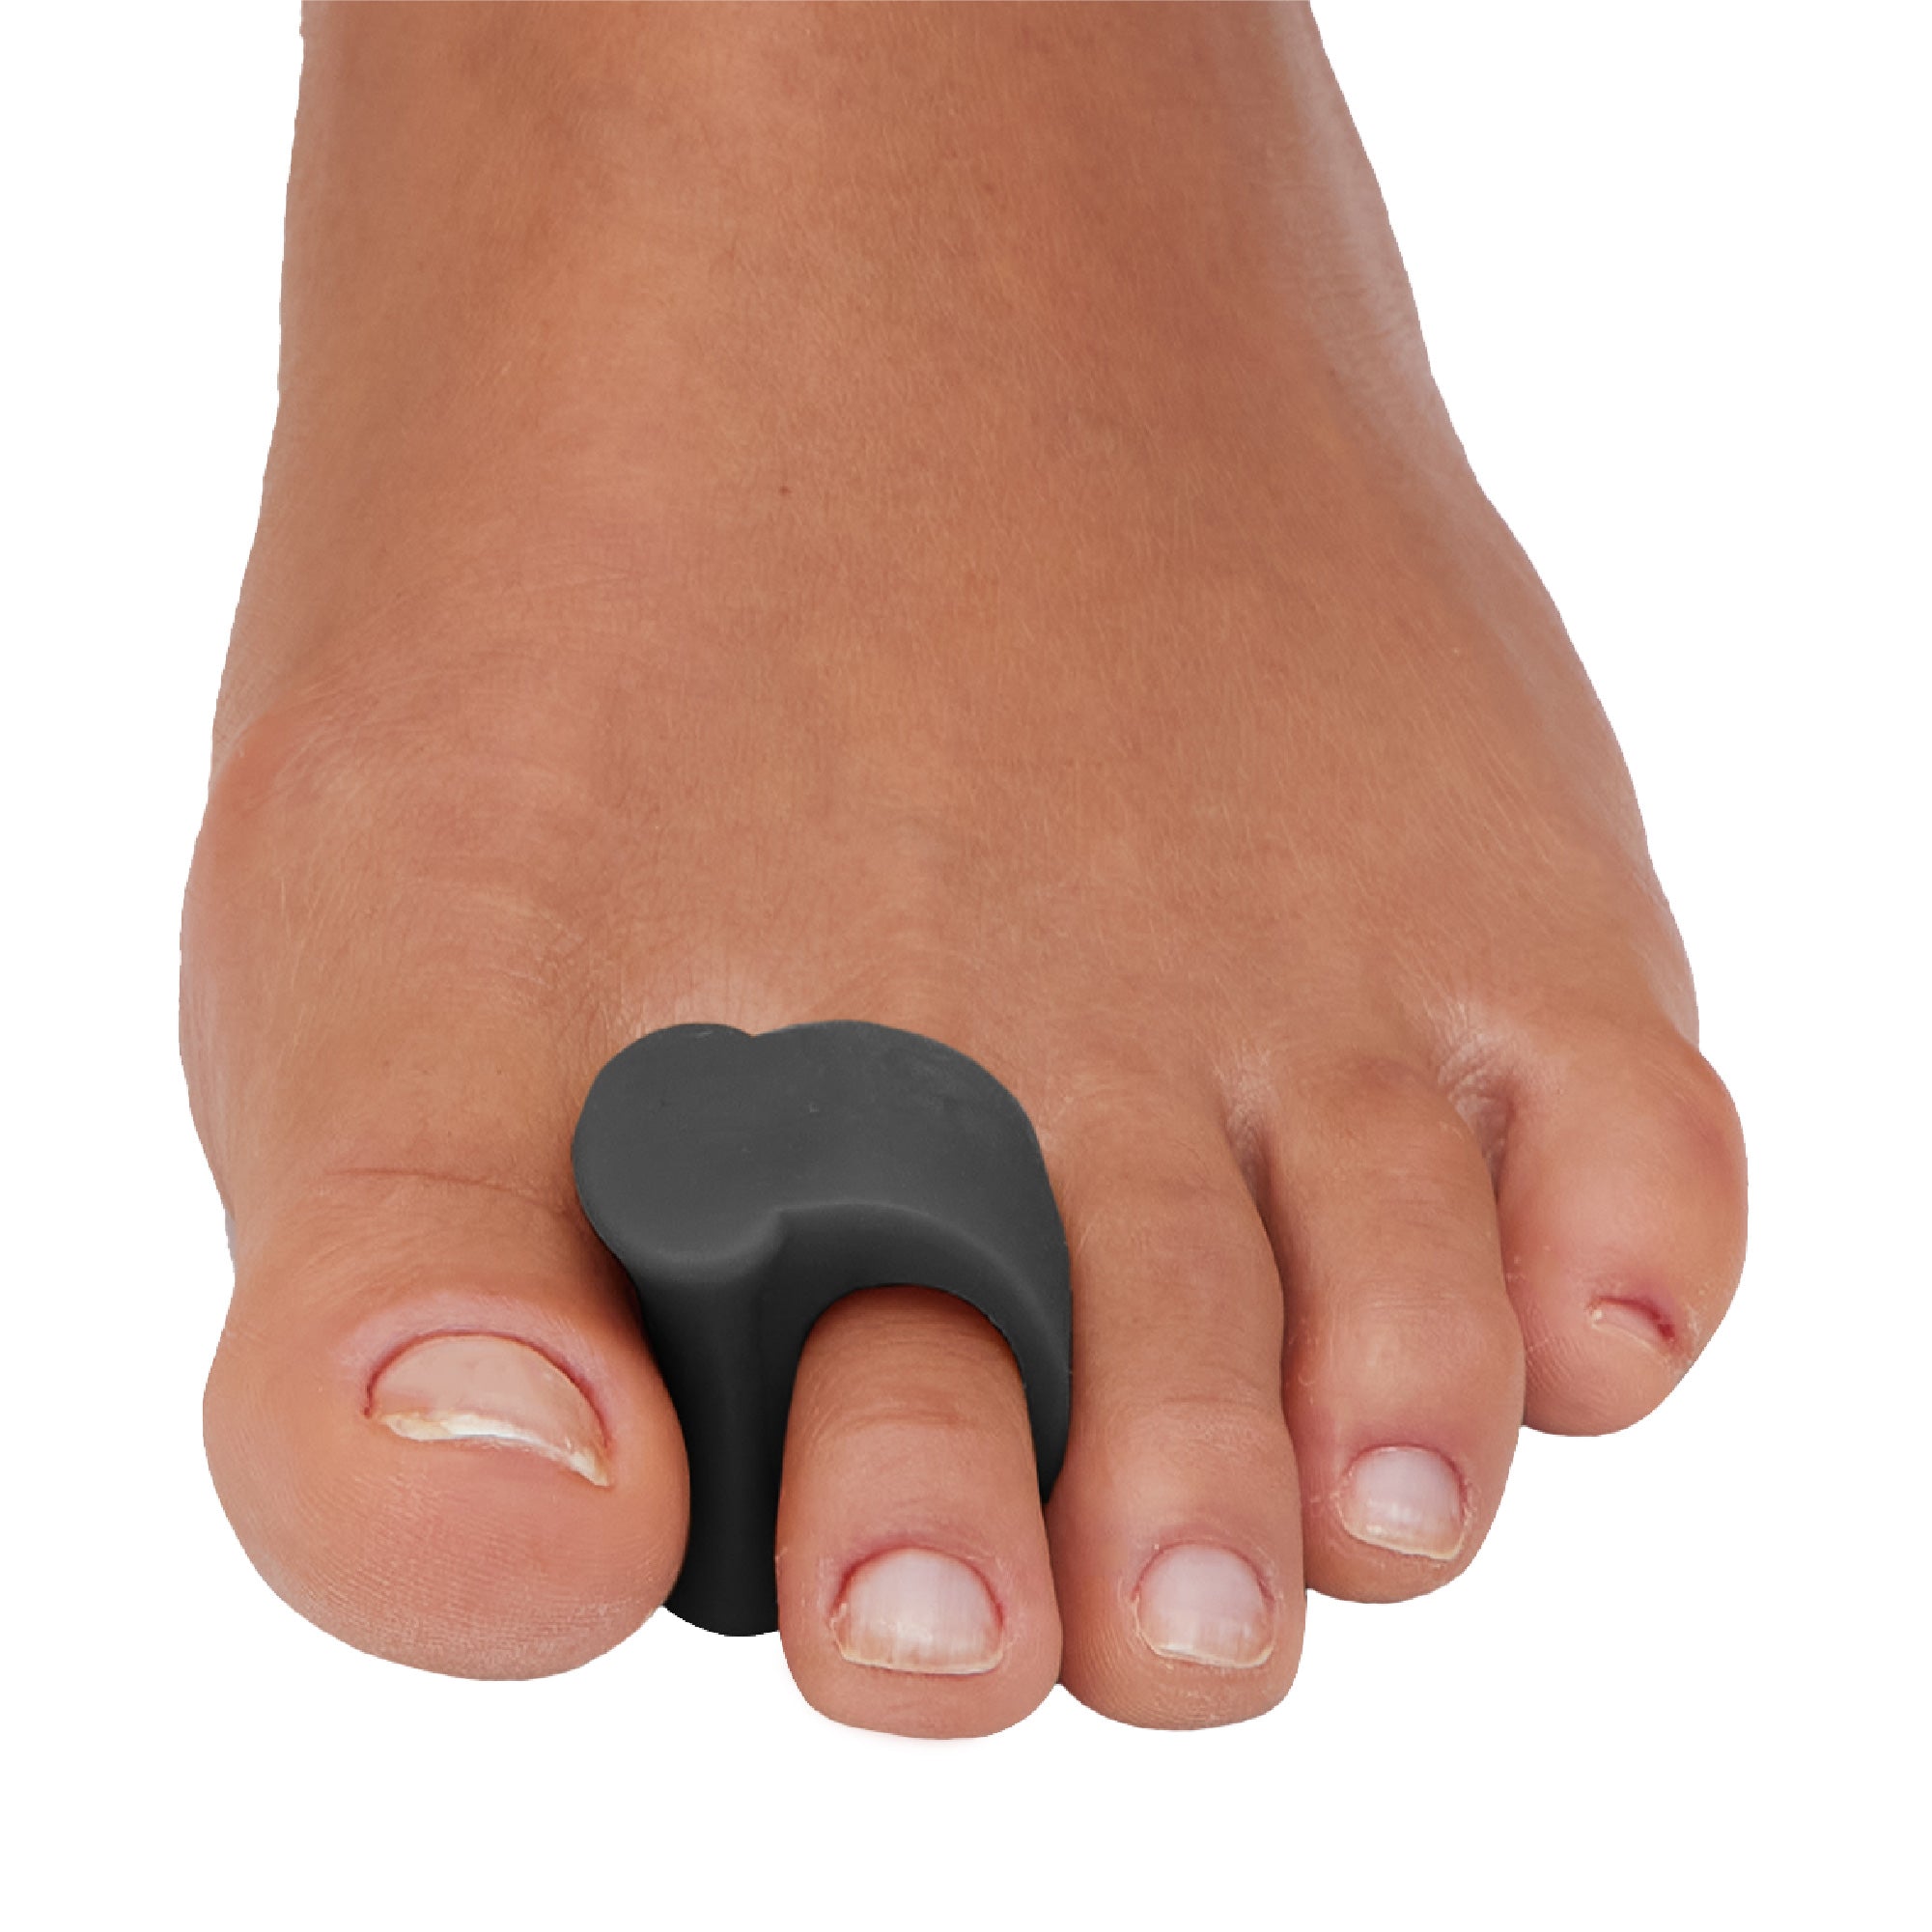 Single Loop Toe Spacer for Bunion Pain - 4 Count - ZenToes